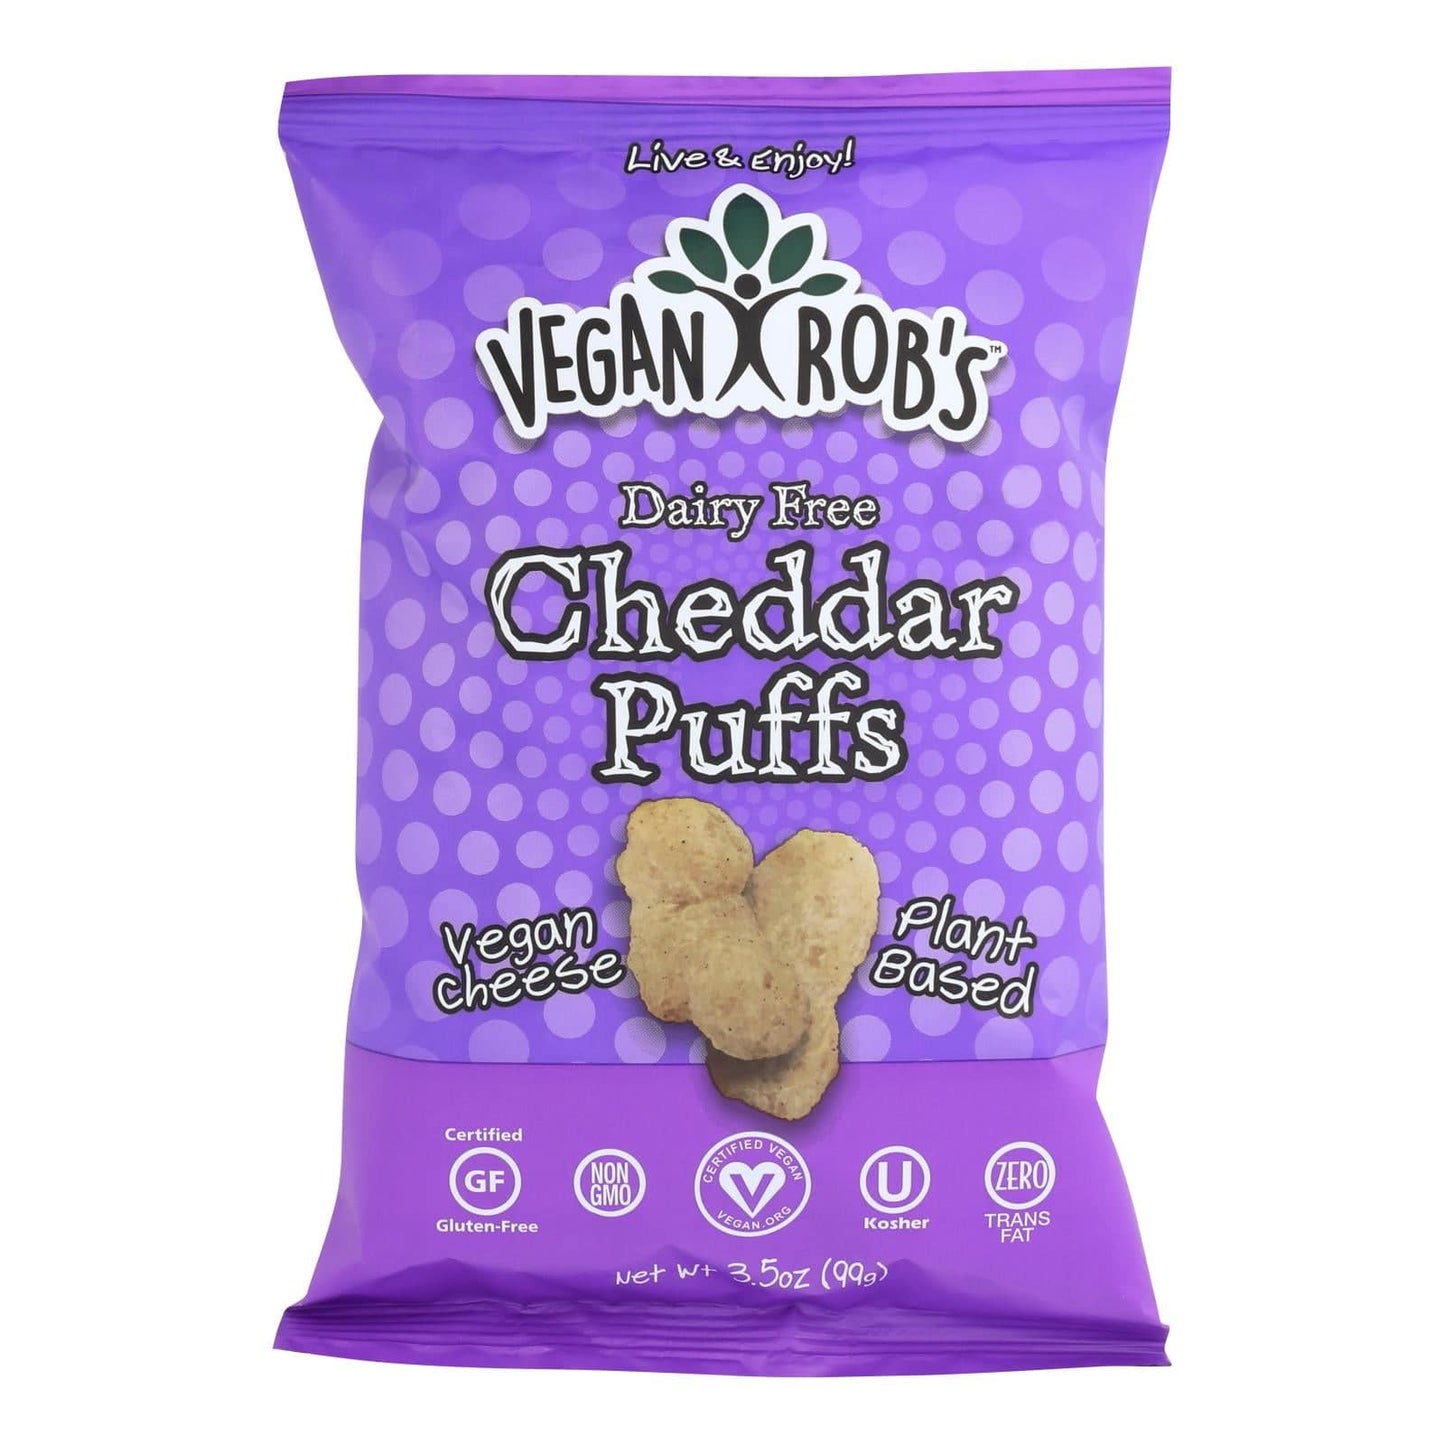 Buy Vegan Rob's Dairy Free Puffs - Cheddar - Case Of 12 - 3.5 Oz  at OnlyNaturals.us